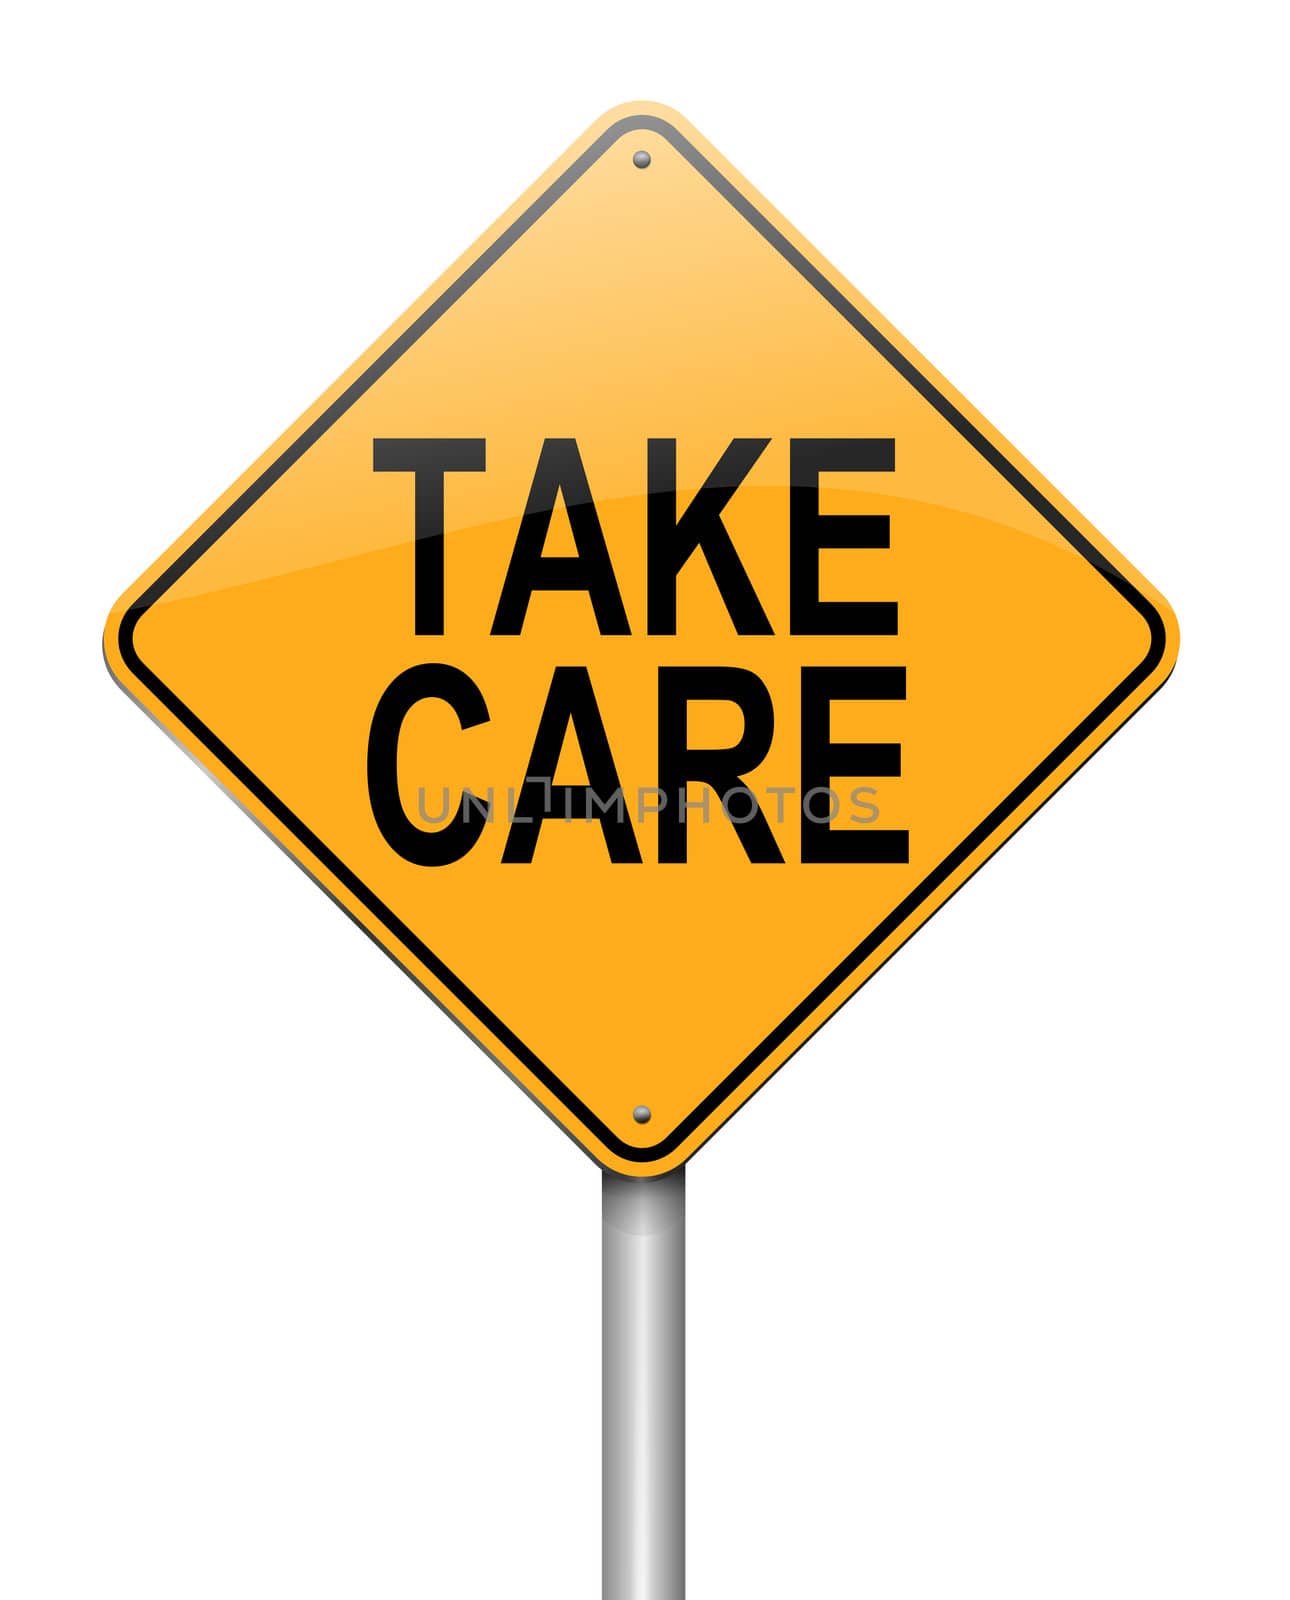 Illustration depicting a roadsign with a take care concept. White background.